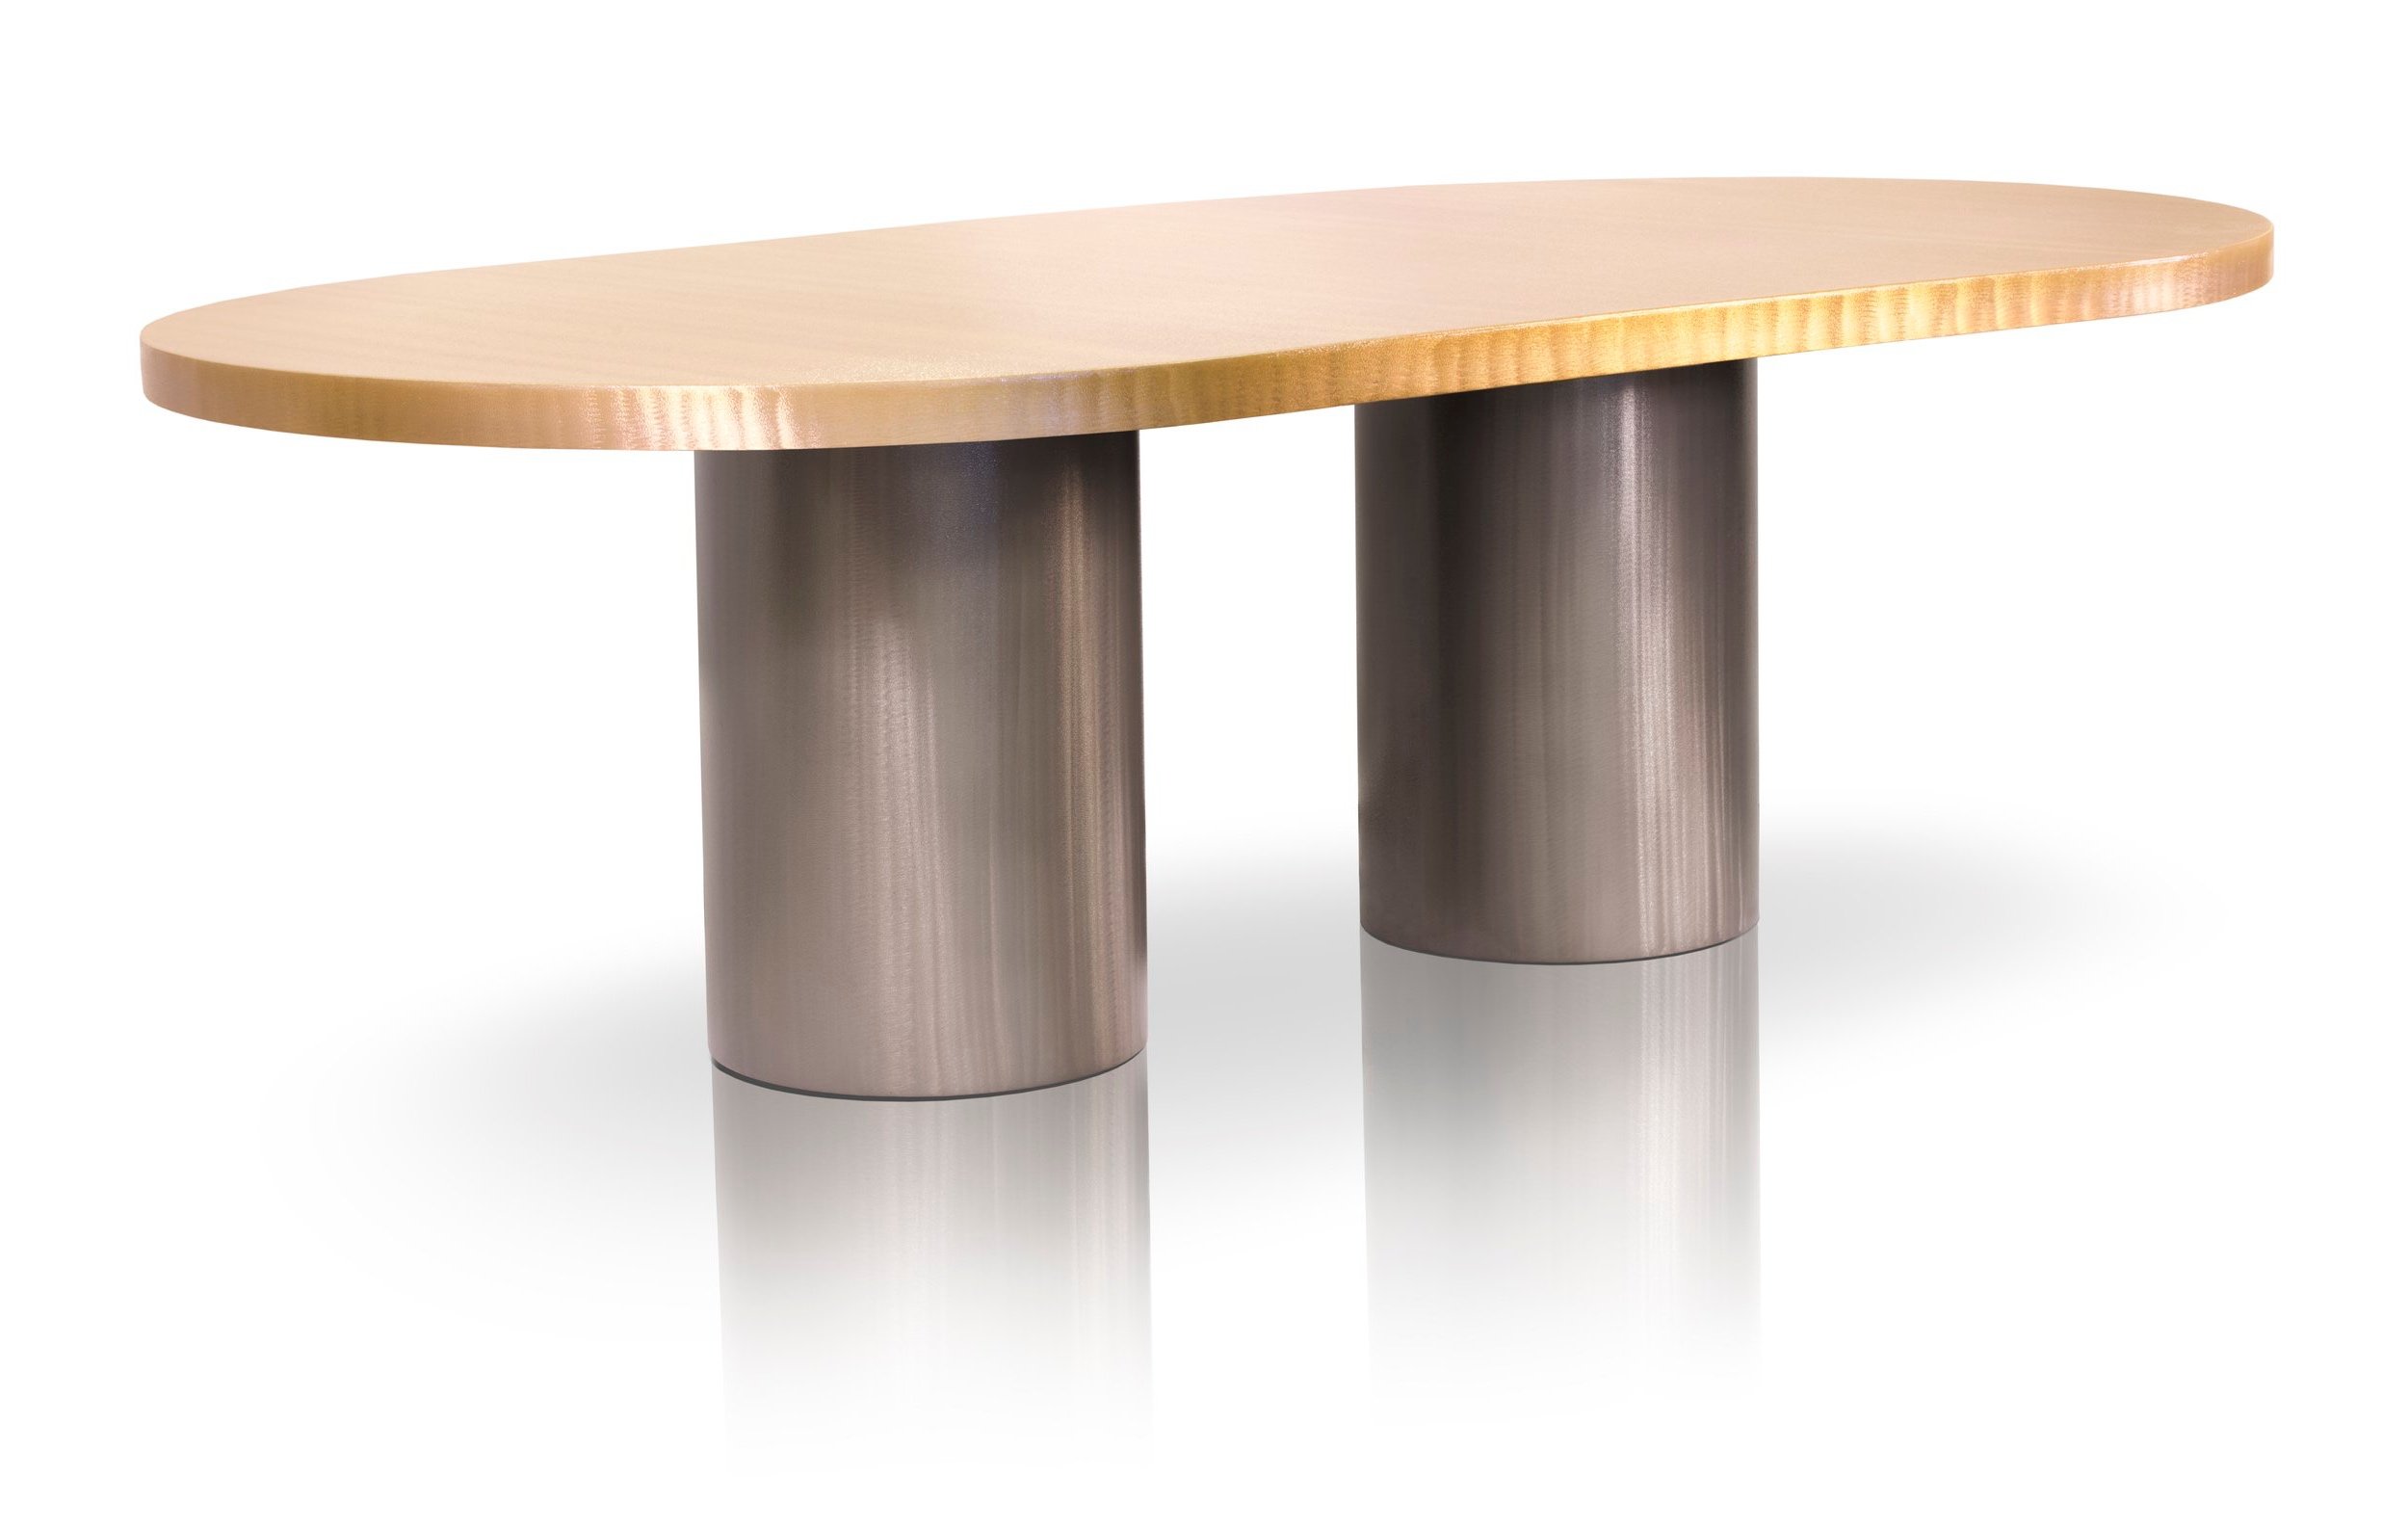 Metall+Furniture_Dining+Table-Sydney_Racetrack-Gold-Double_Plynth-STR+STL_PIC-2.jpg